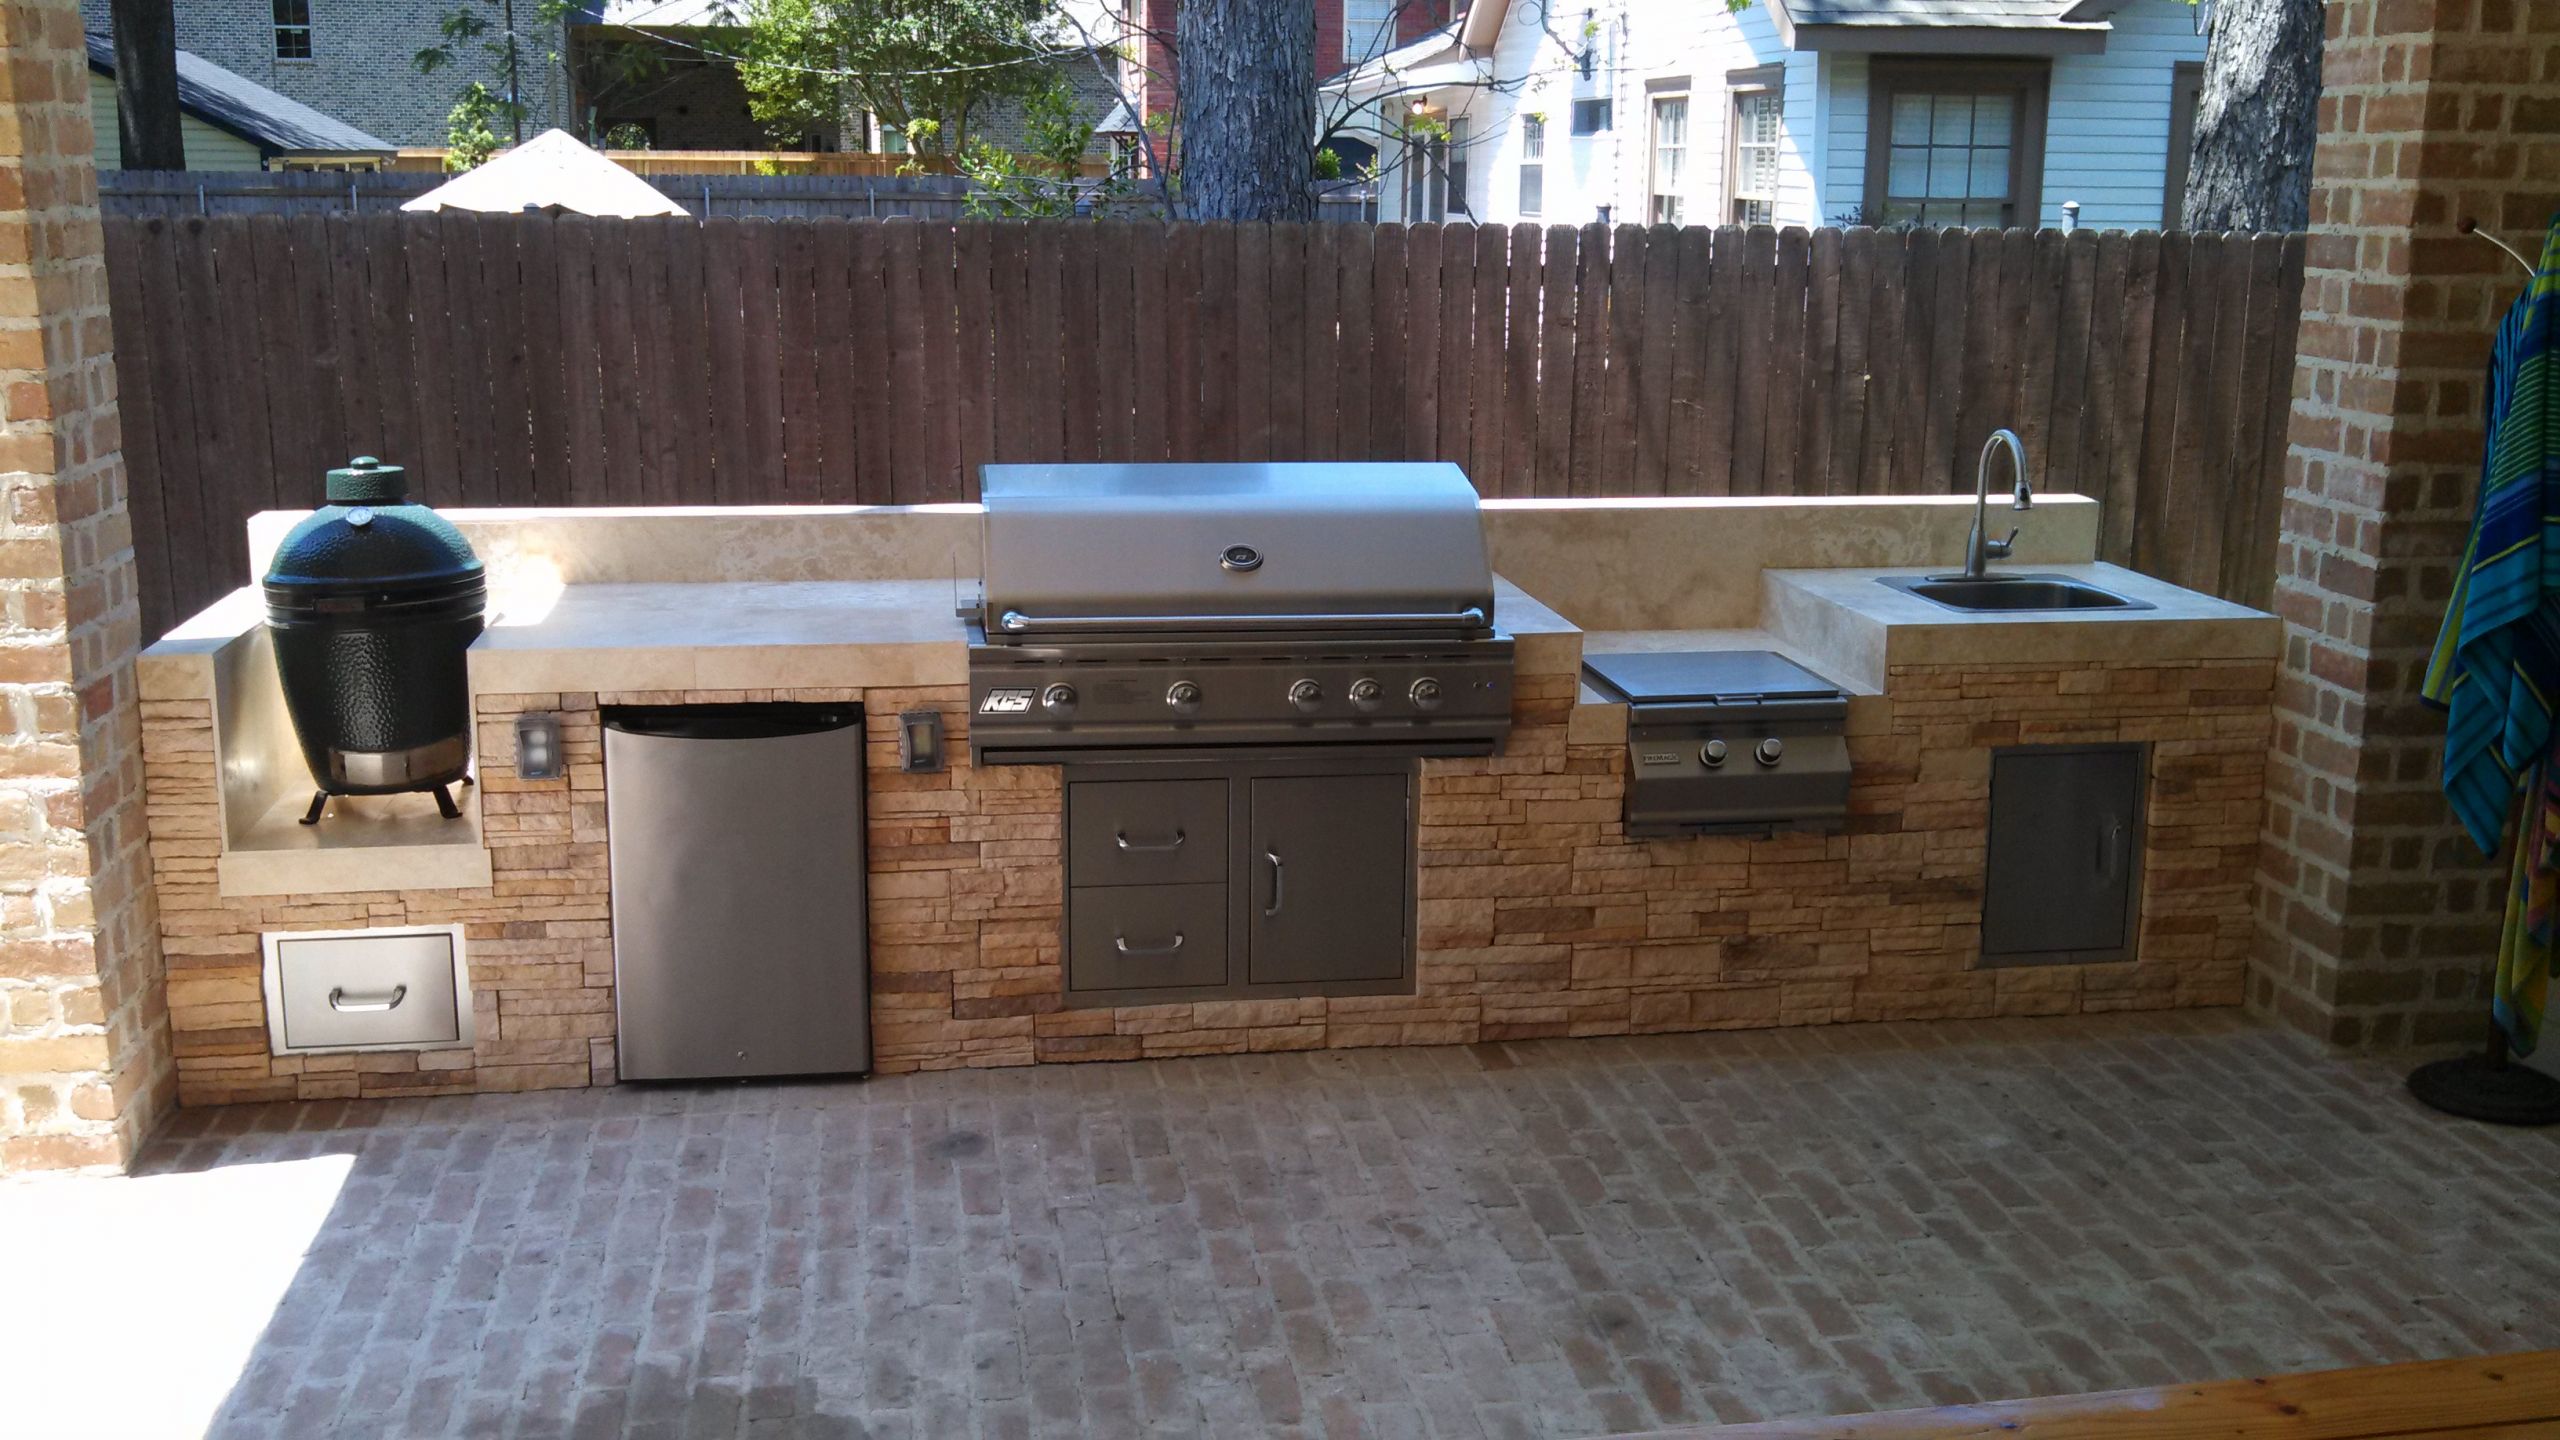 Outdoor Kitchen With Green Egg
 Big Green Egg Grill Giveaway e Week Left